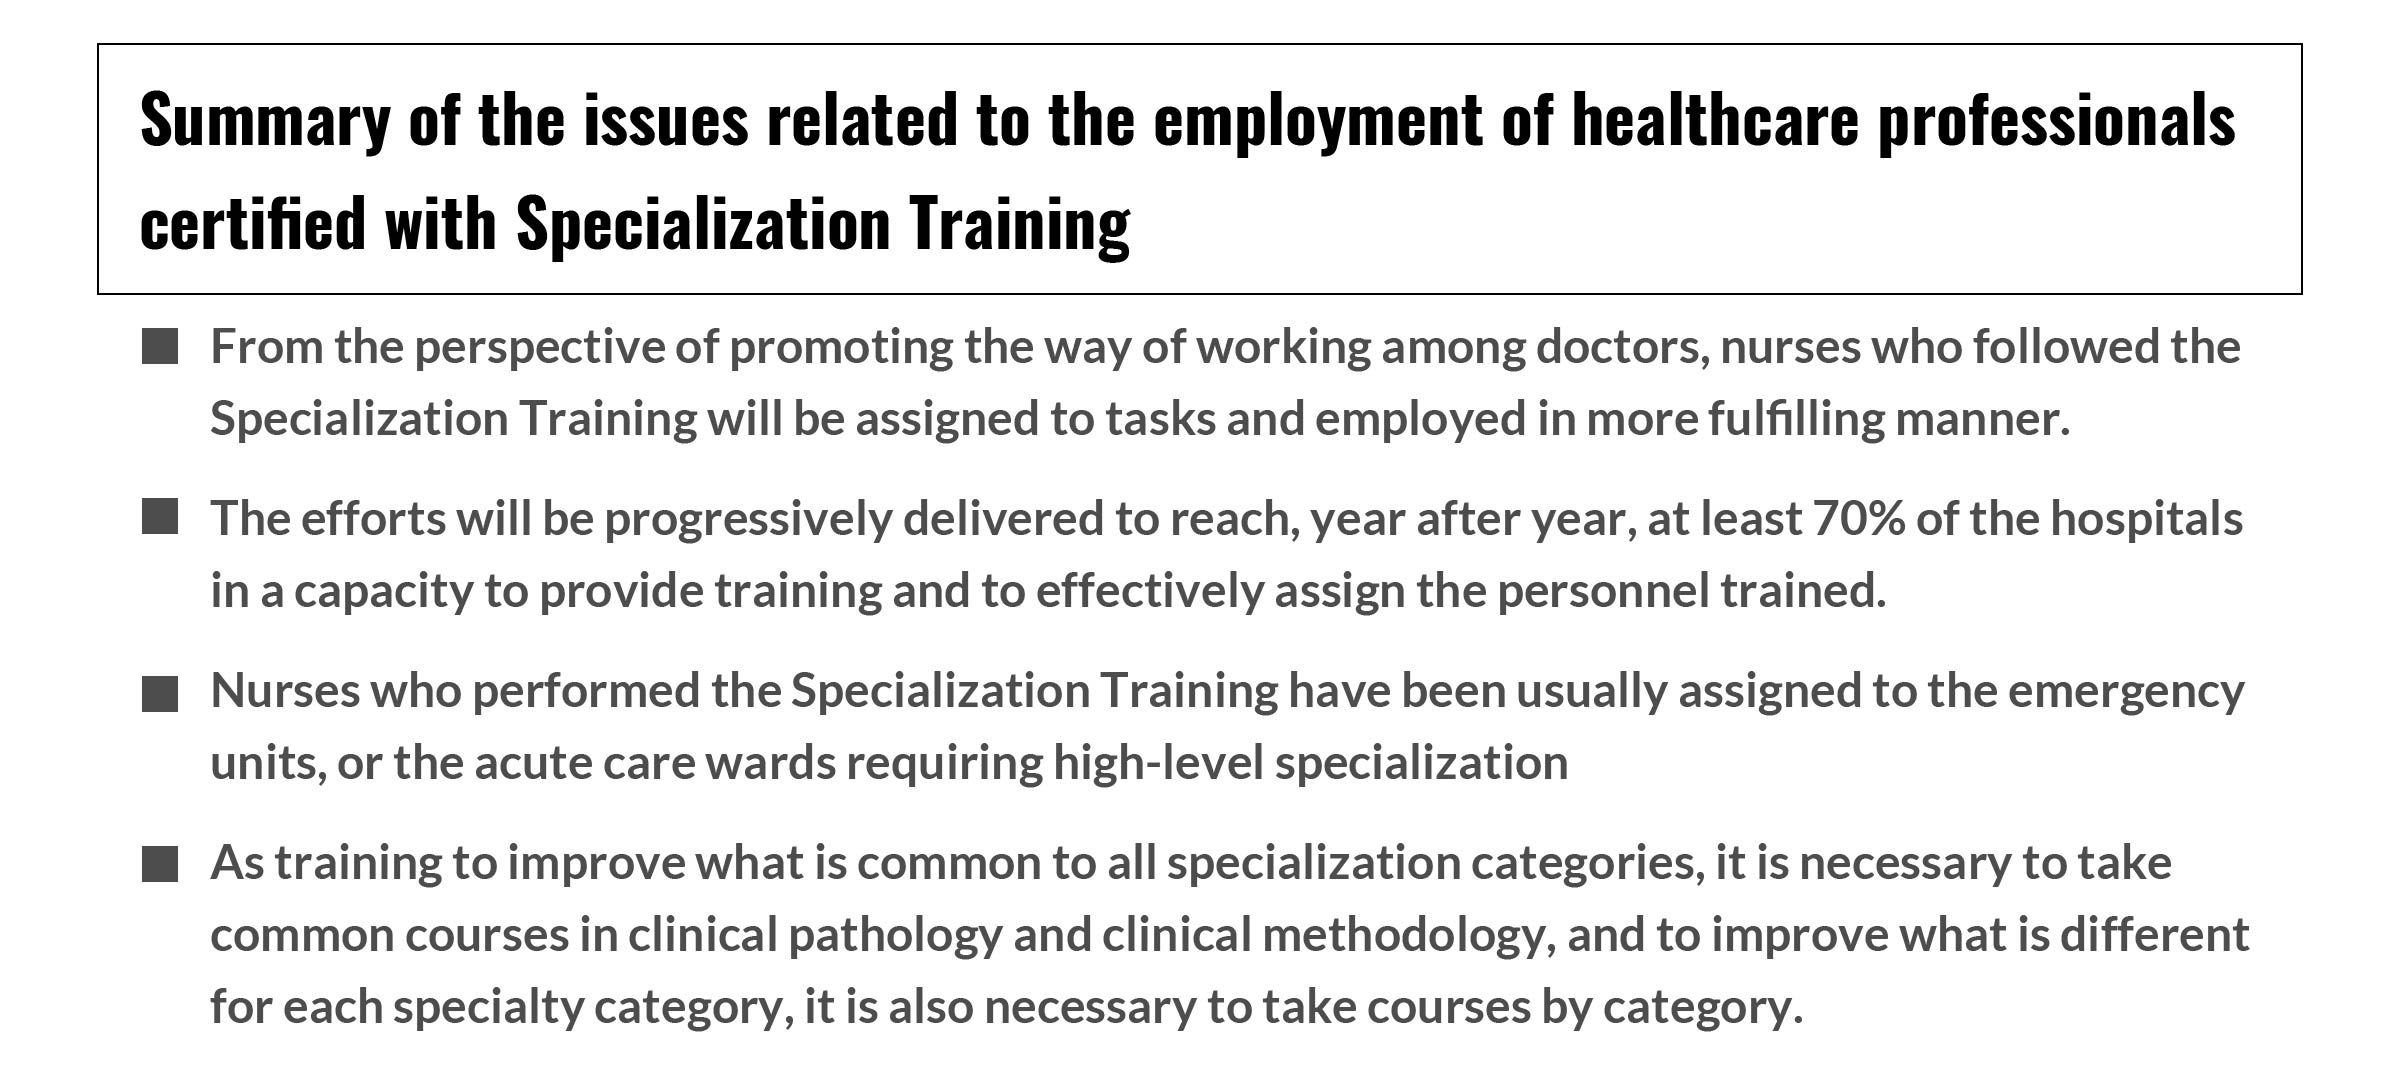 Summary of the issues related to the employment of healthcare professionals certified with Specialization Training